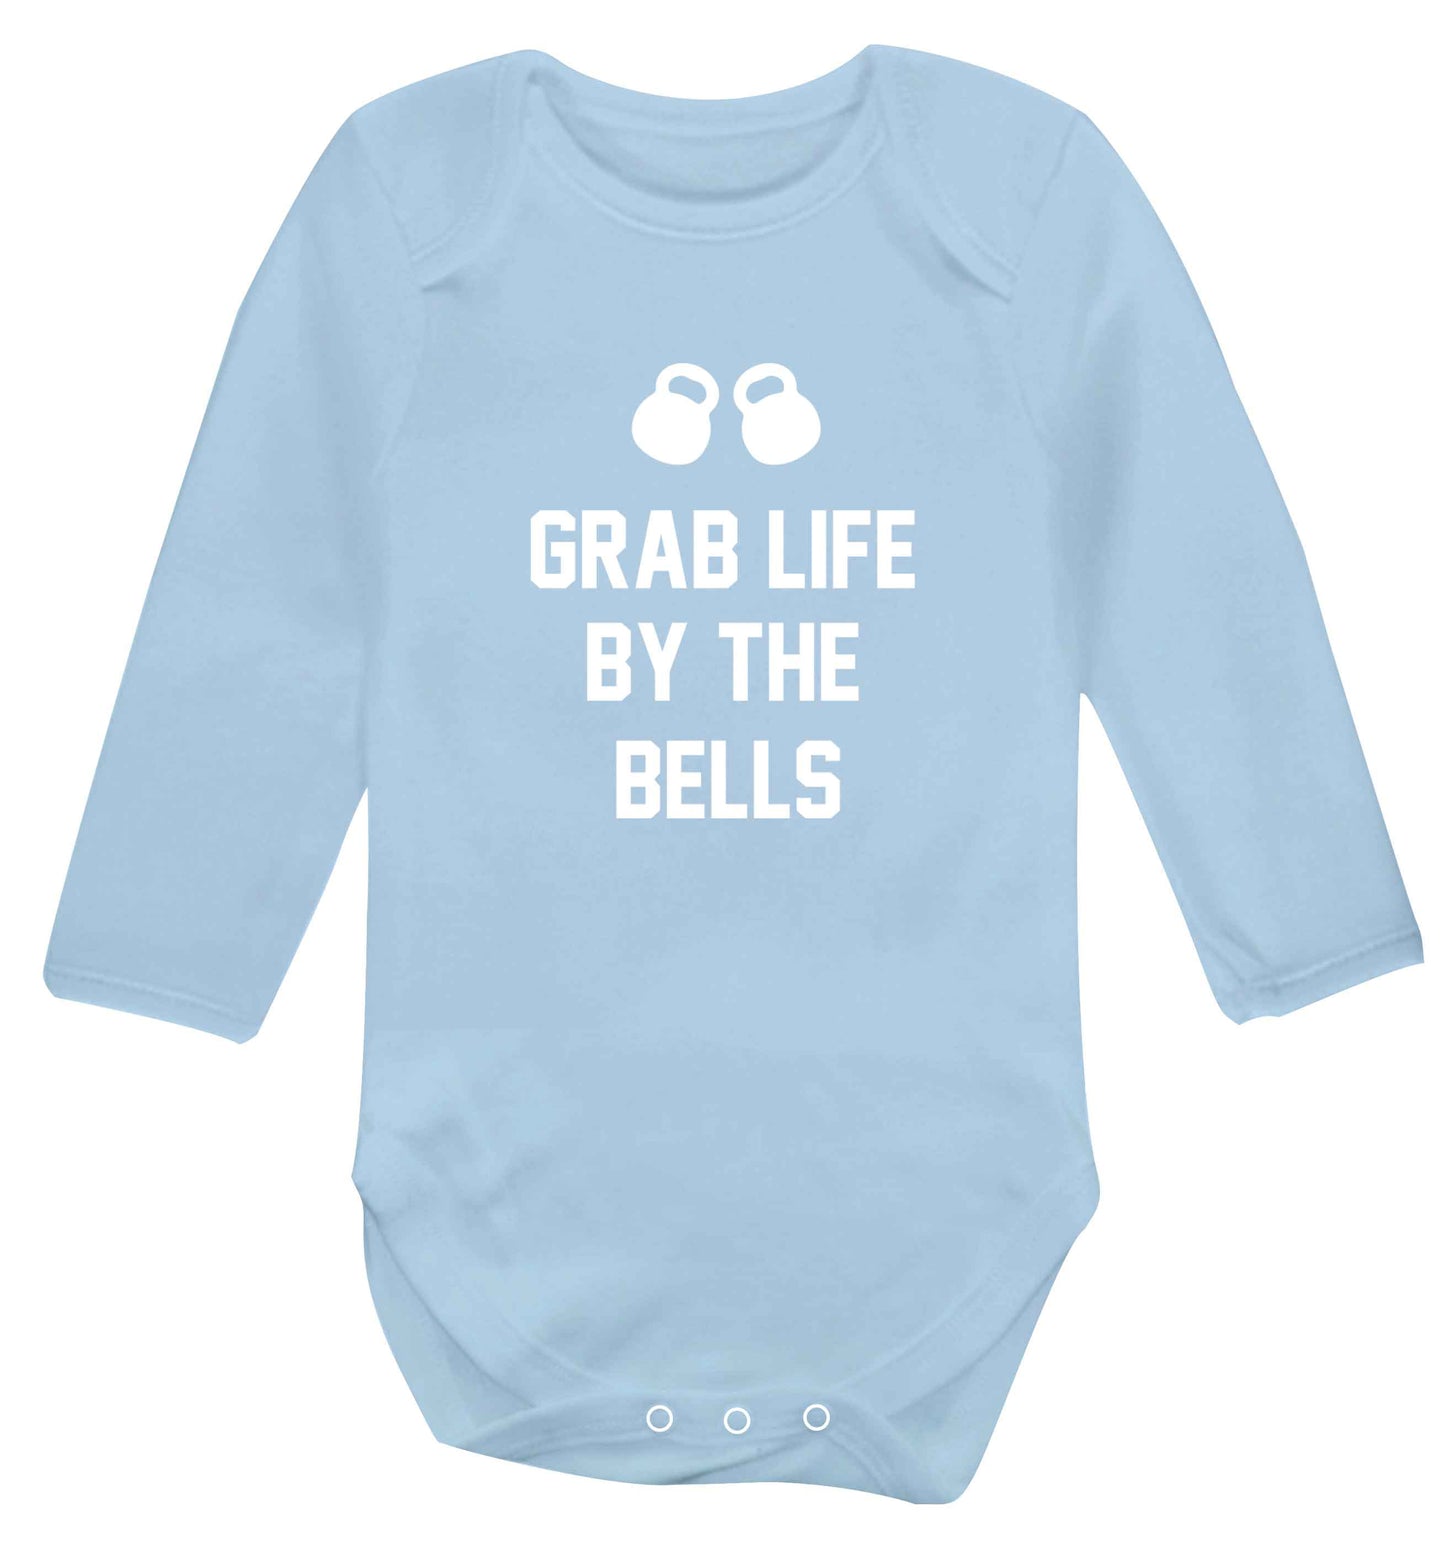 Grab life by the bells baby vest long sleeved pale blue 6-12 months